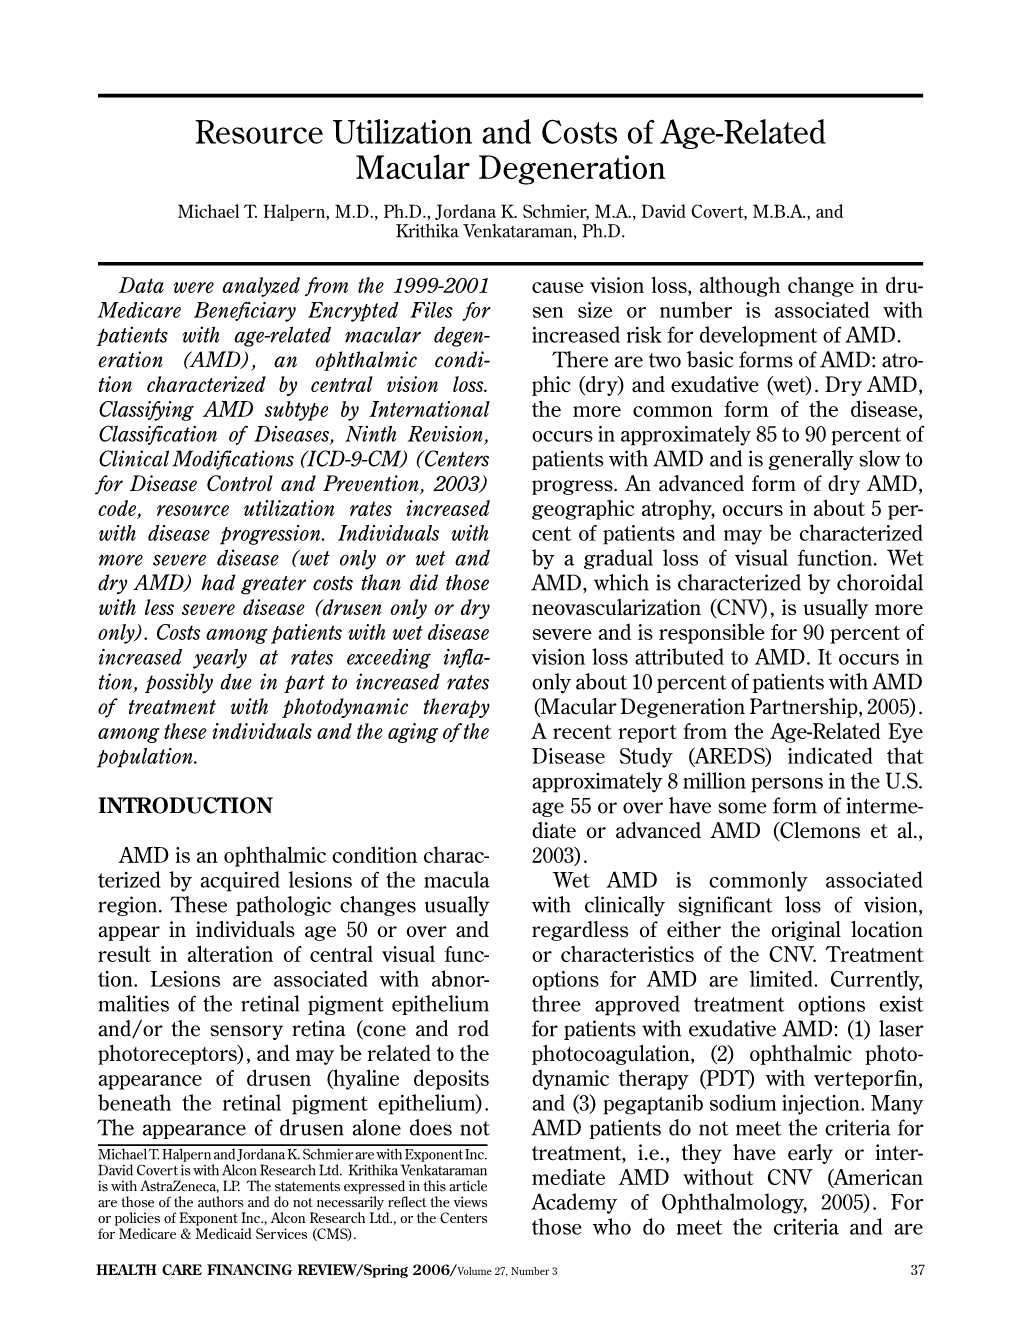 Resource Utilization and Costs of Age-Related Macular Degeneration Michael T